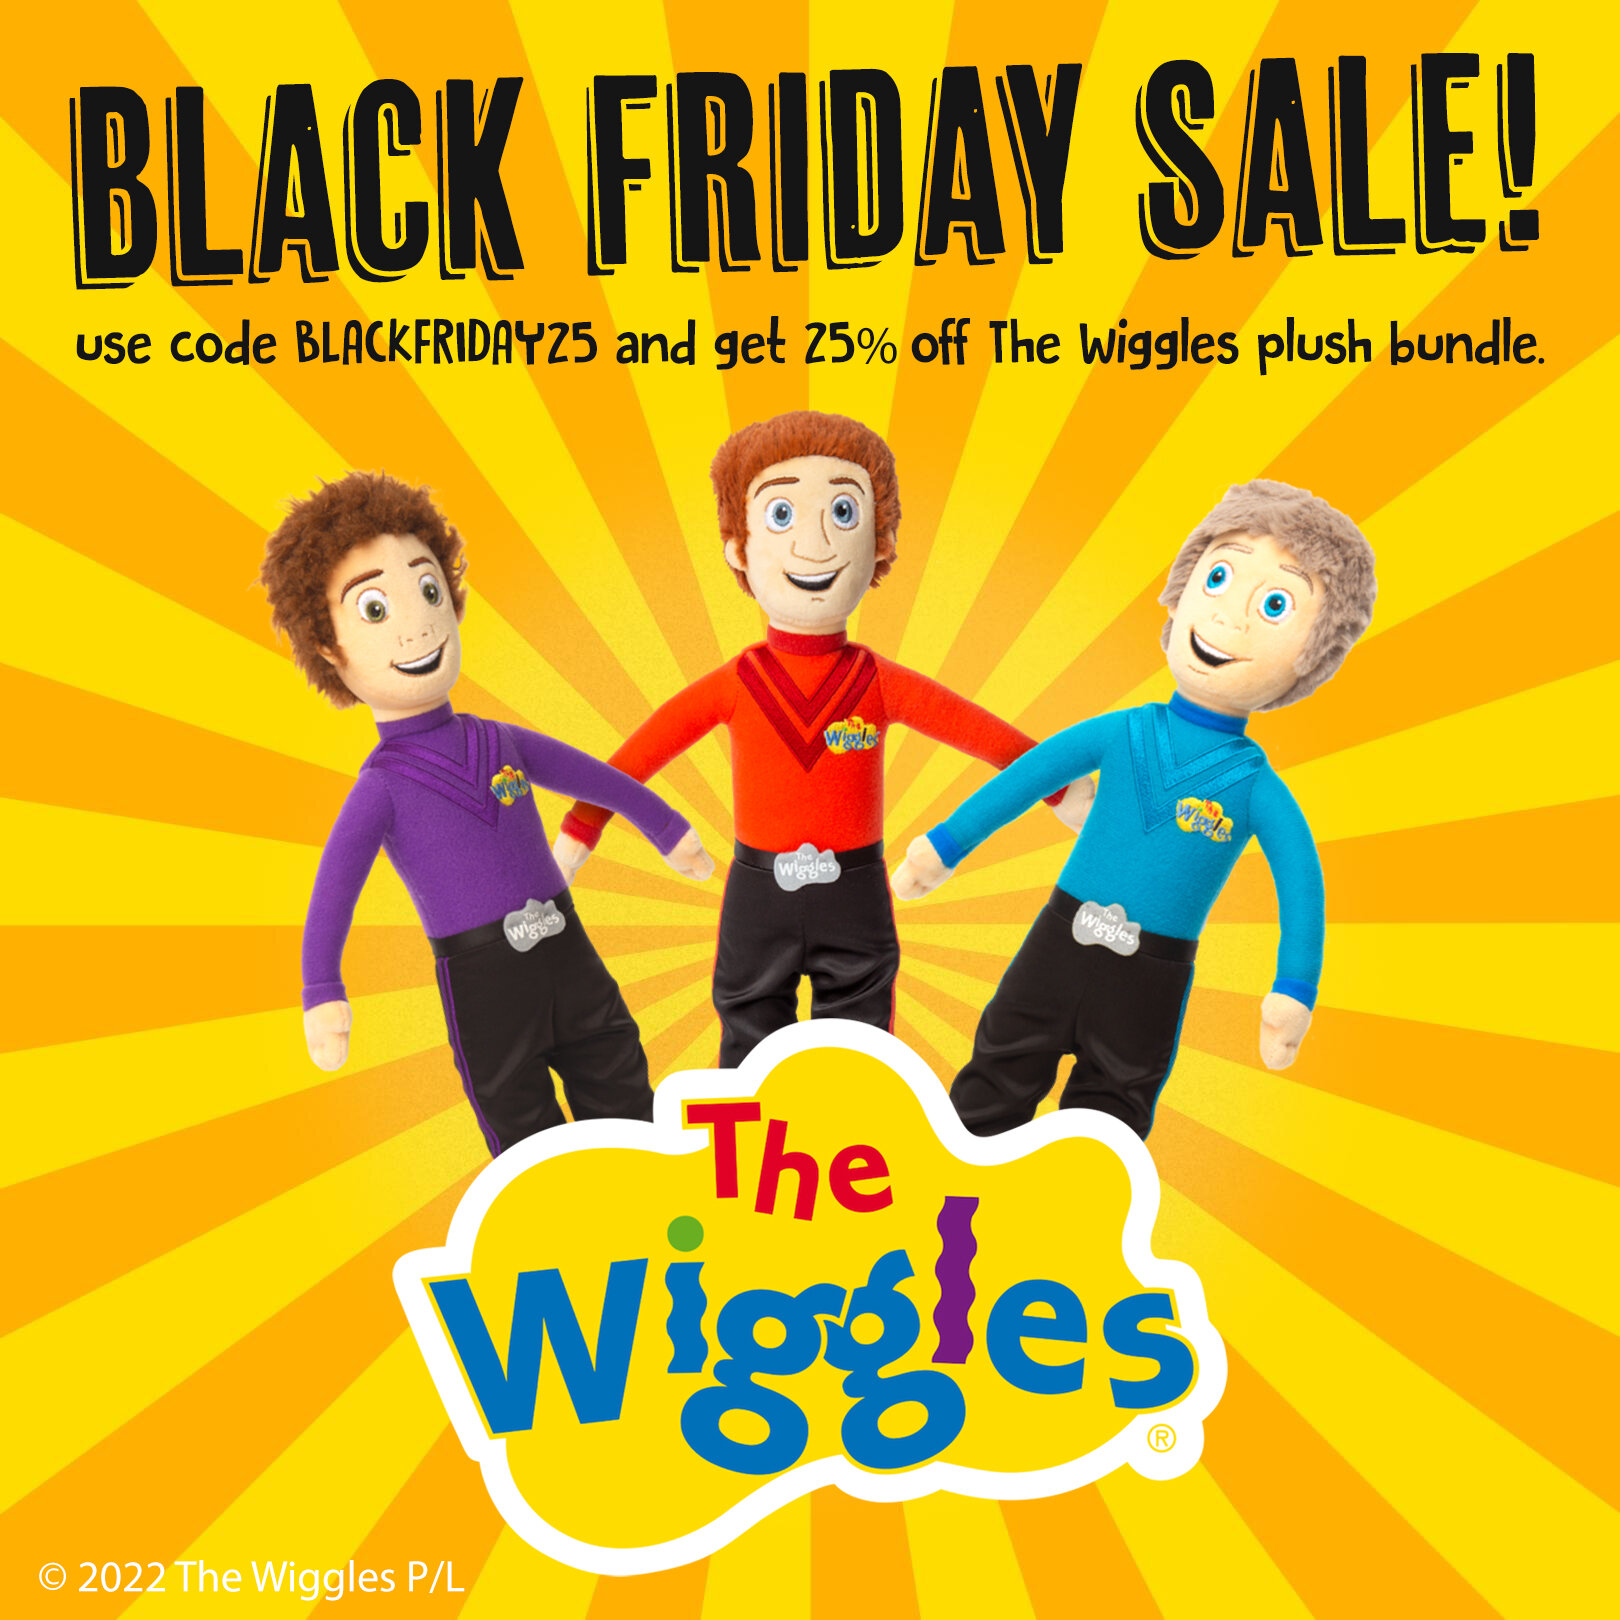 Save 25% on the Wiggles Plush Doll Bundle! Includes all 4 of our best selling Plush Dolls. Hurry, expires November 28. Promo Code: BLACKFRIDAY - Link in Bio

 #mightymojotoys #blackfridayweekend #blackfriday #plushies #blackfriday2022 #blackfridaydea